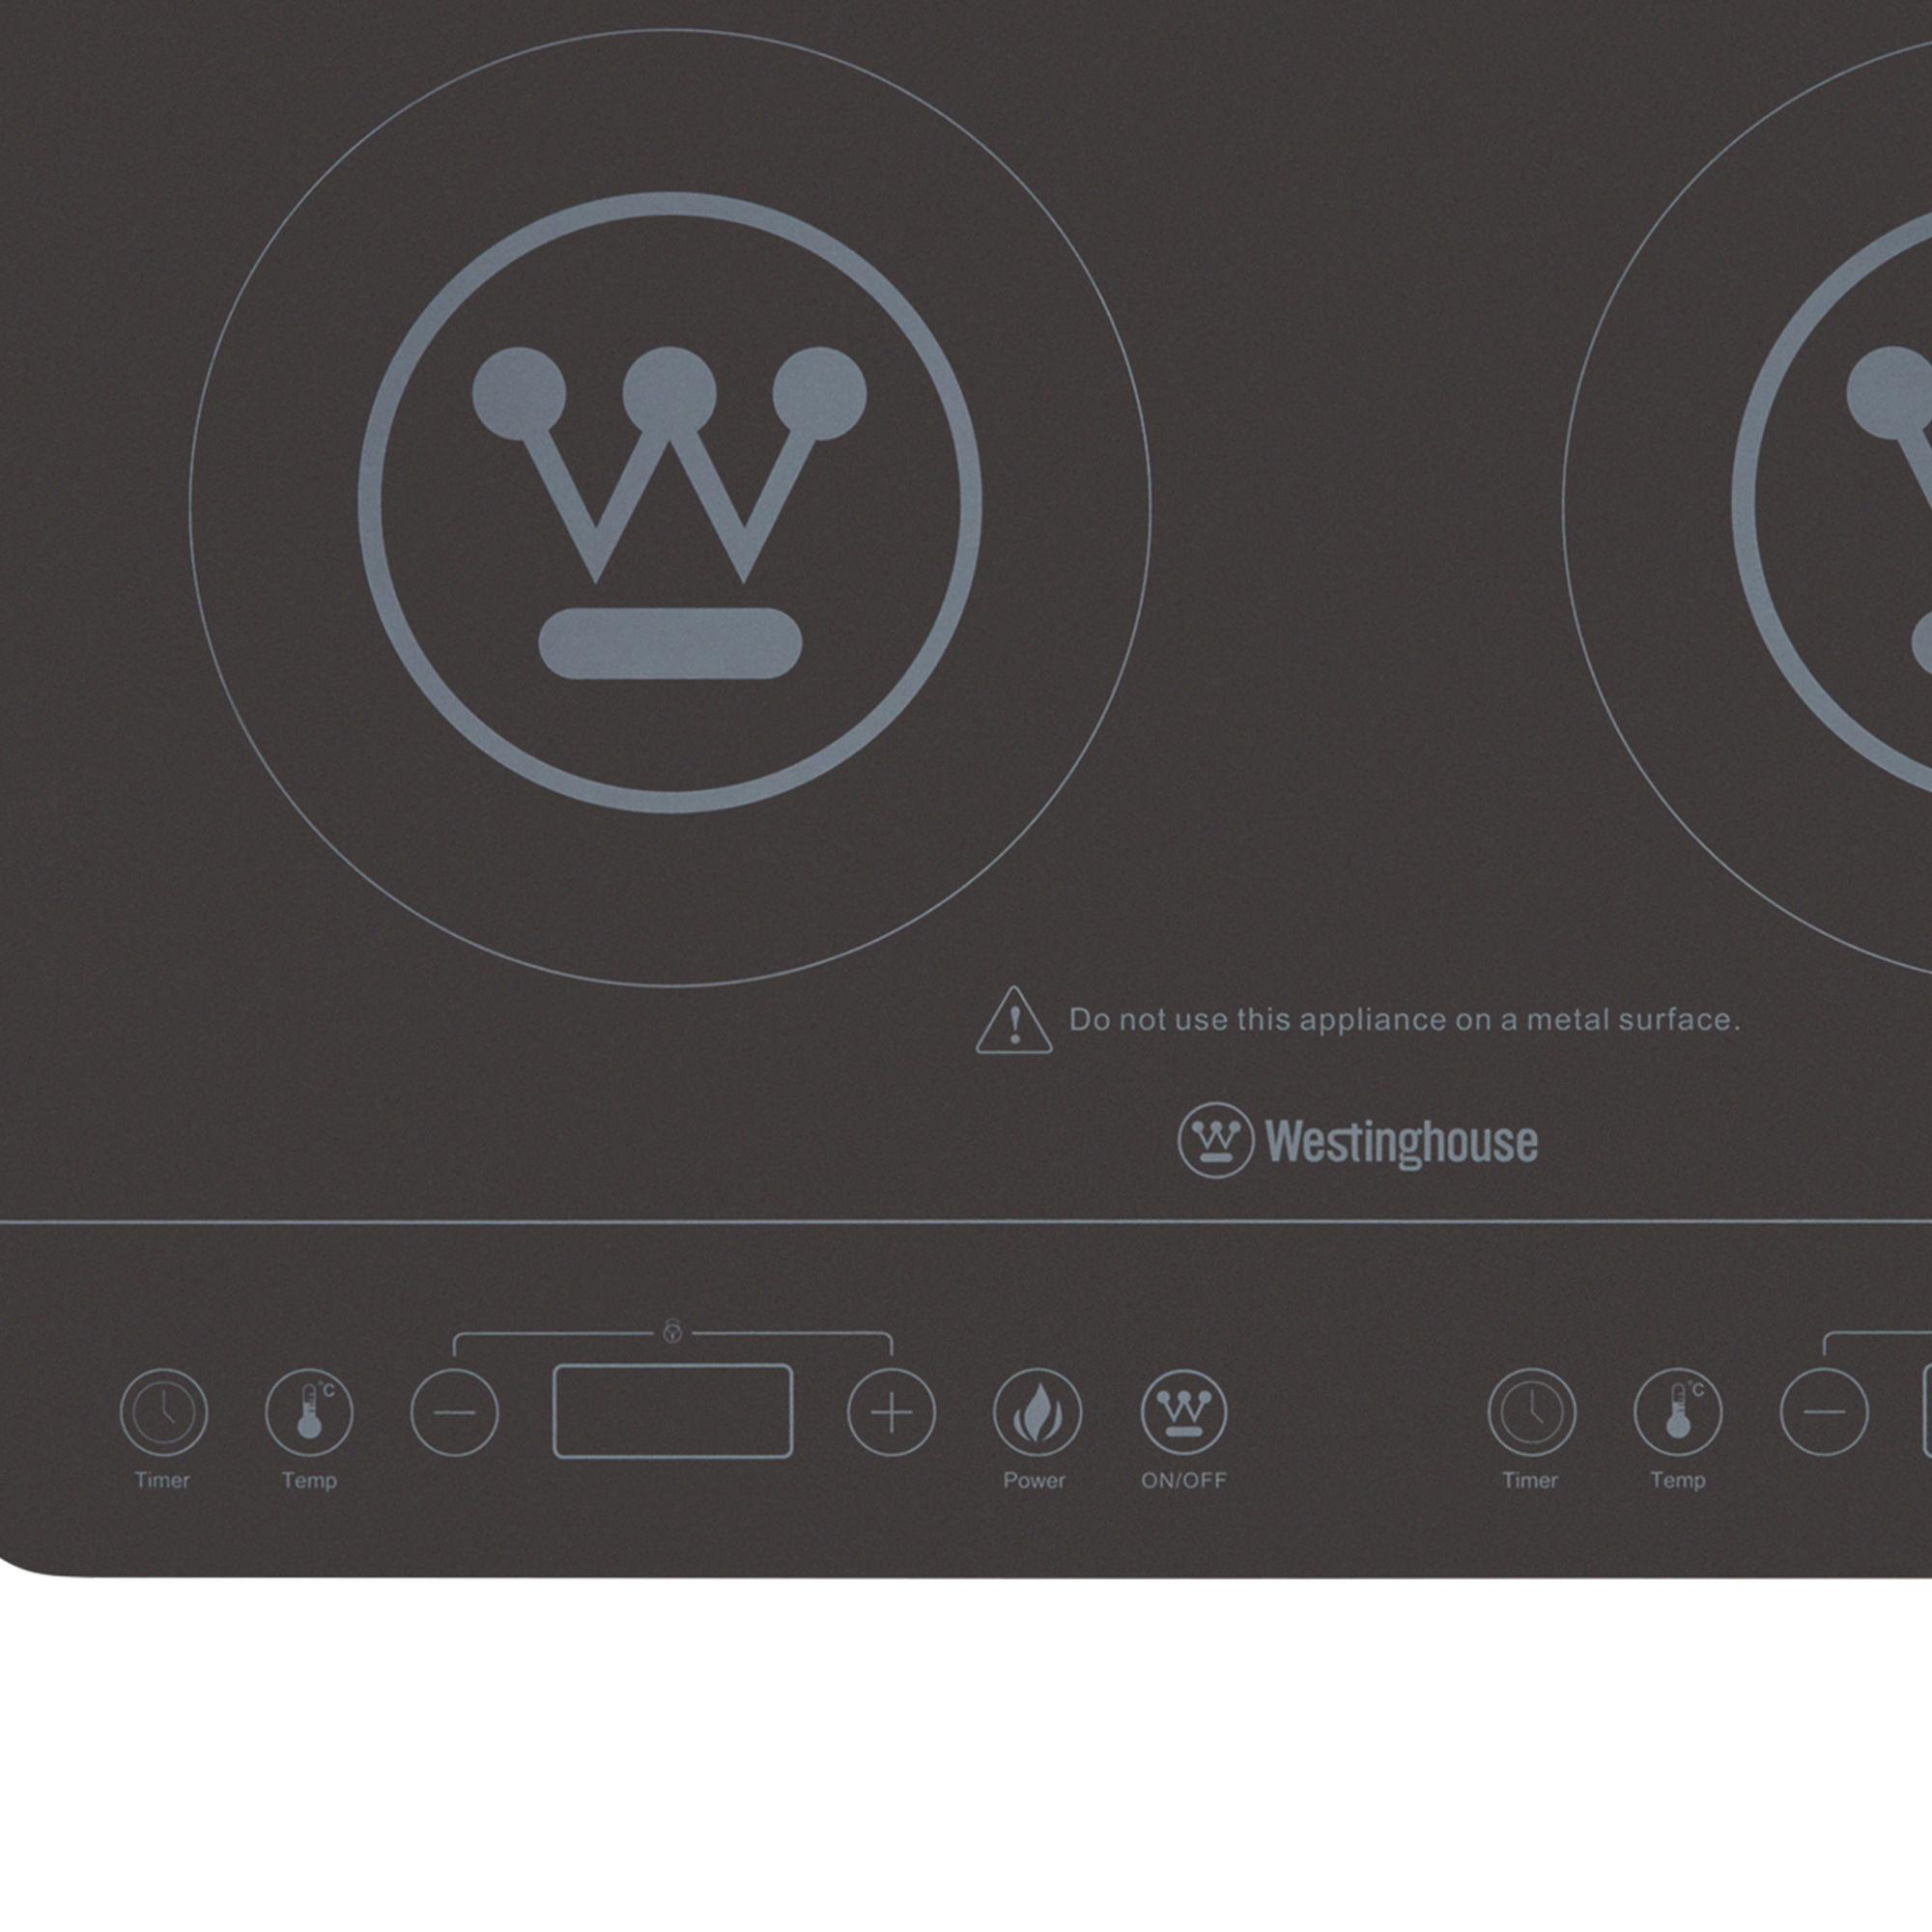 Westinghouse Twin Induction Cooktop Image 4